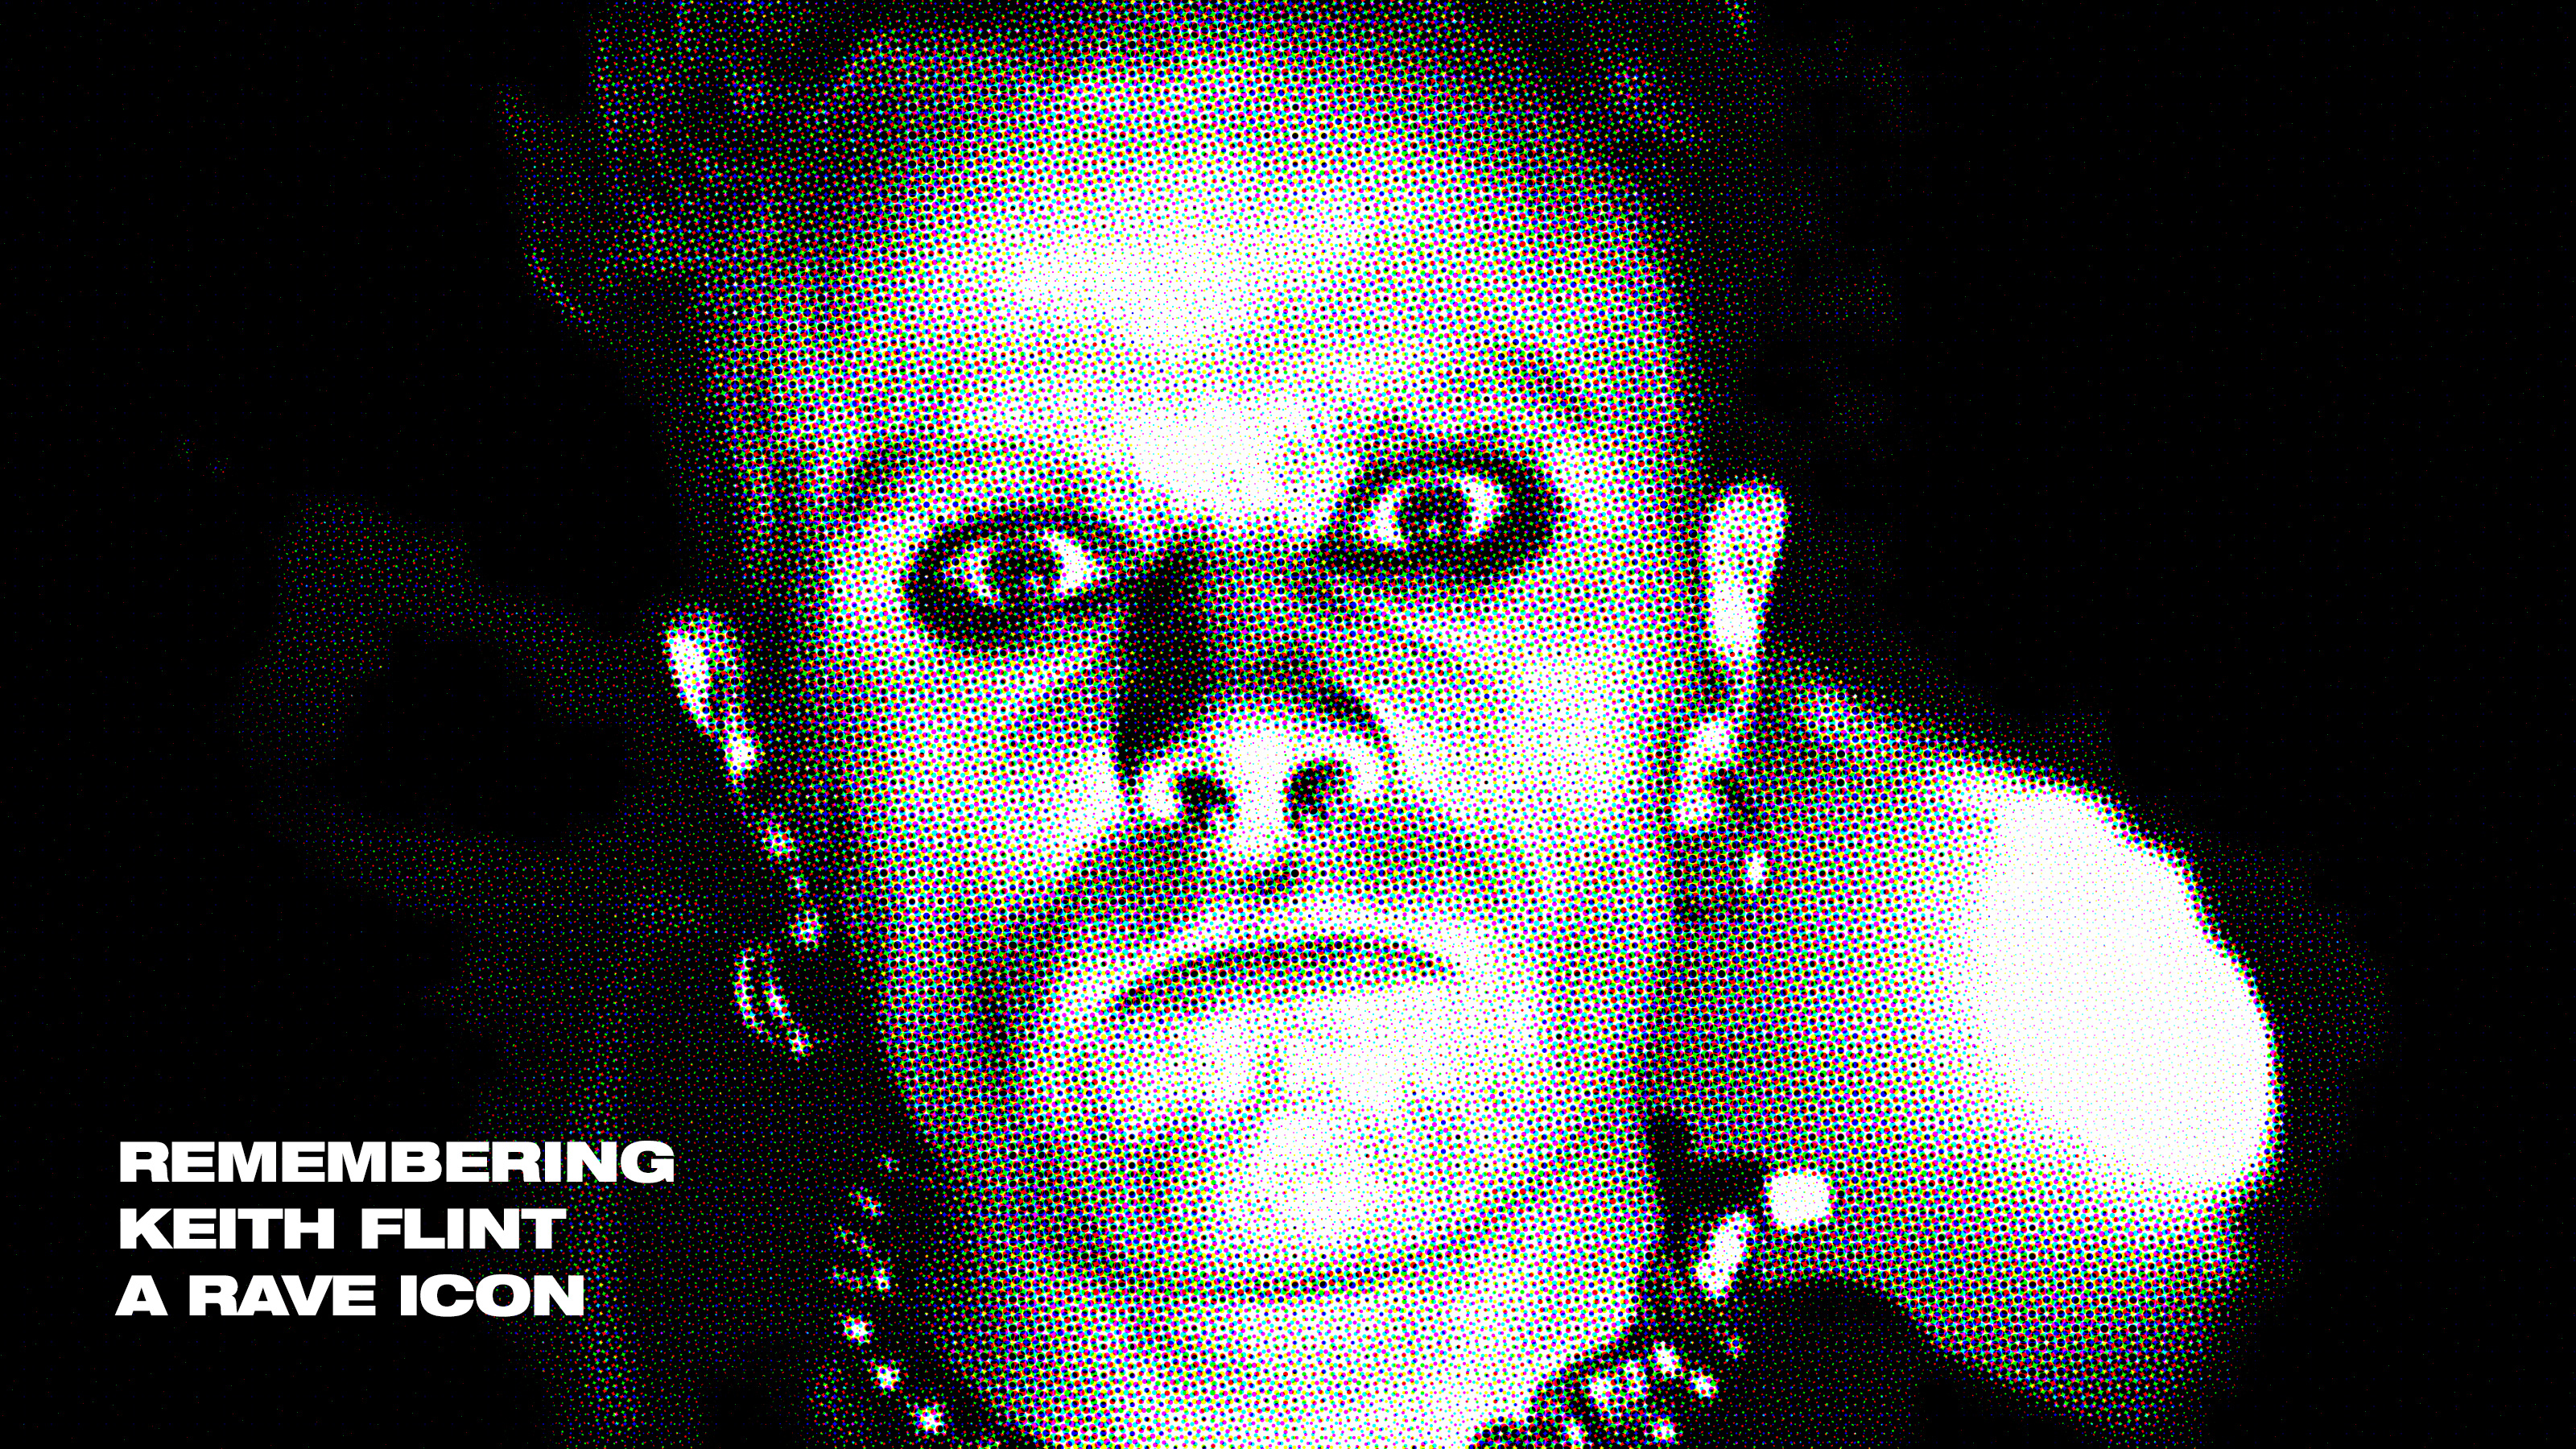 Remembering Keith Flint, a rave icon